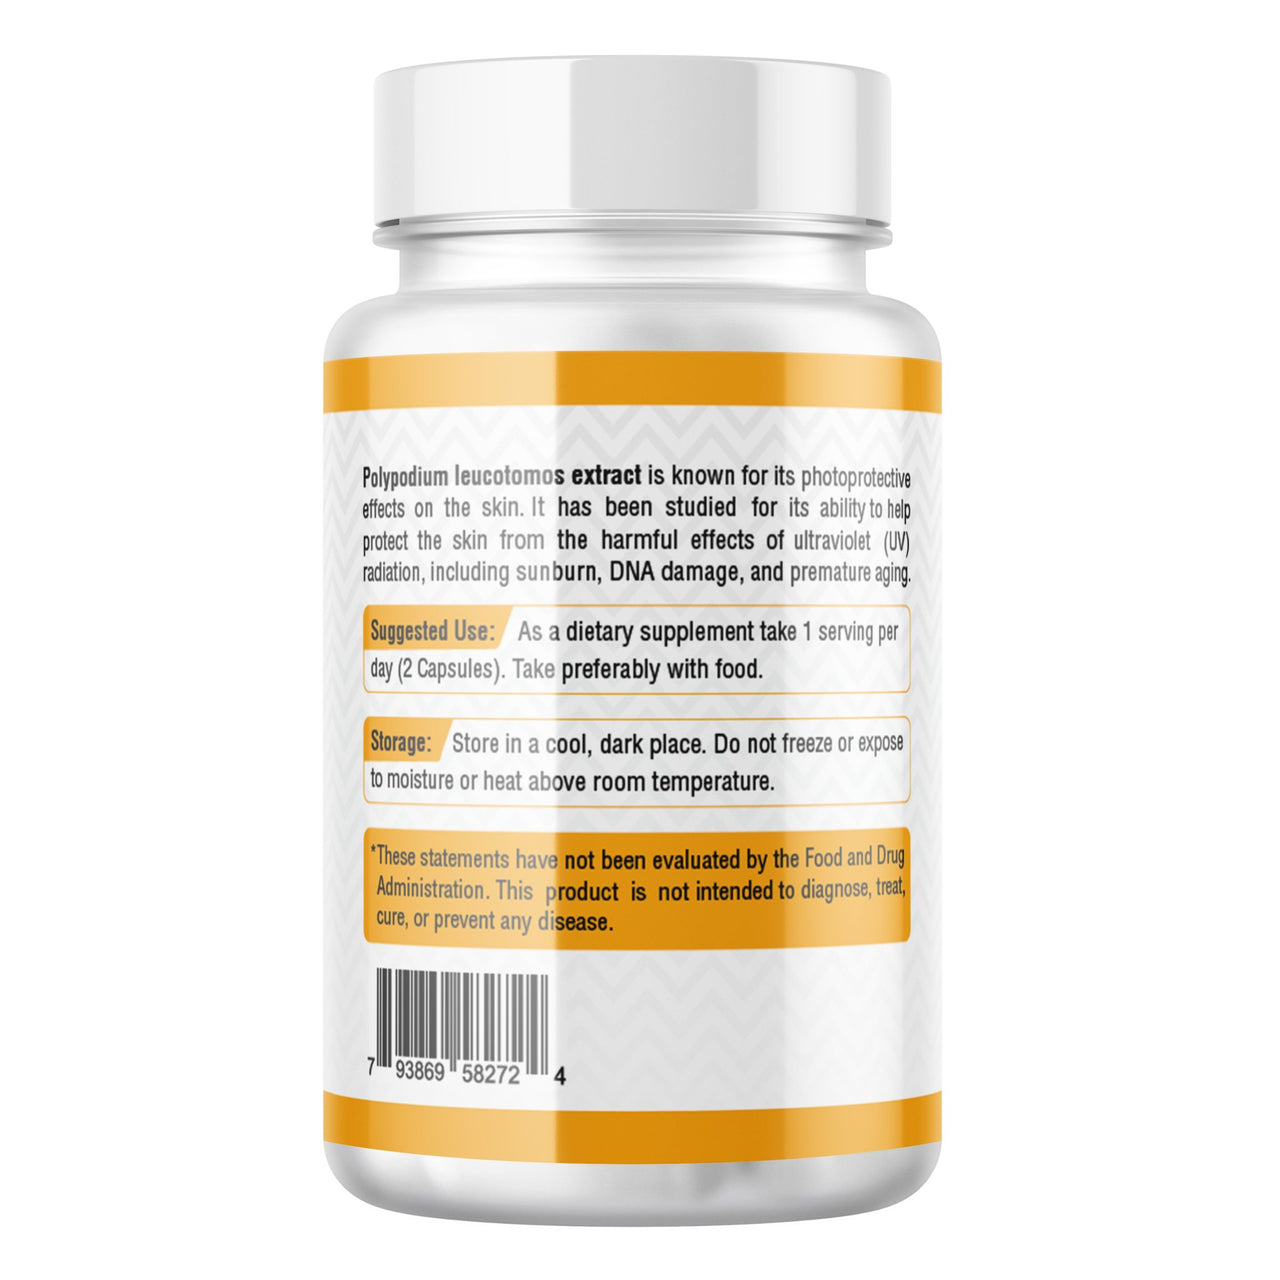 Probase Advanced Niacinamide B3 Supplement - Niacinamide 500mg and PLE Extract 240mg Per Serving - Supports Skin Cell Health and Antioxidant-Rich Vitamin B3 Niacin - 120 Capsules - Probase Nutrition